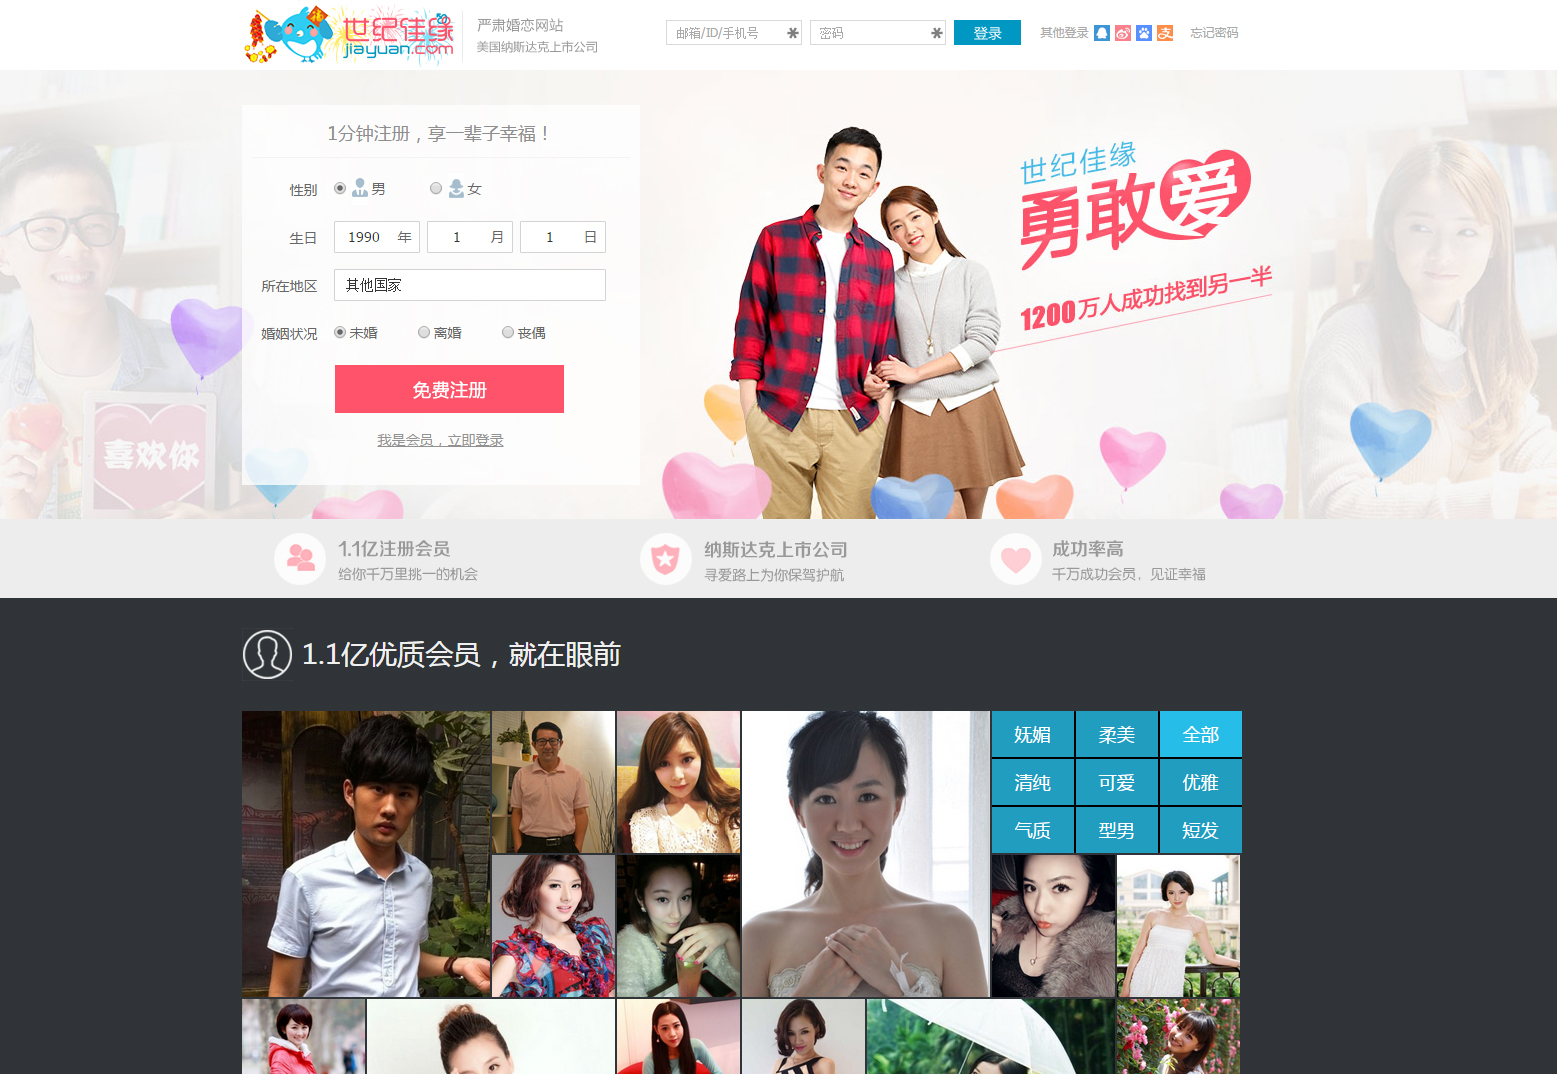 HERE’S OUR TOP 3 MOST POPULAR CHINESE DATING APPS